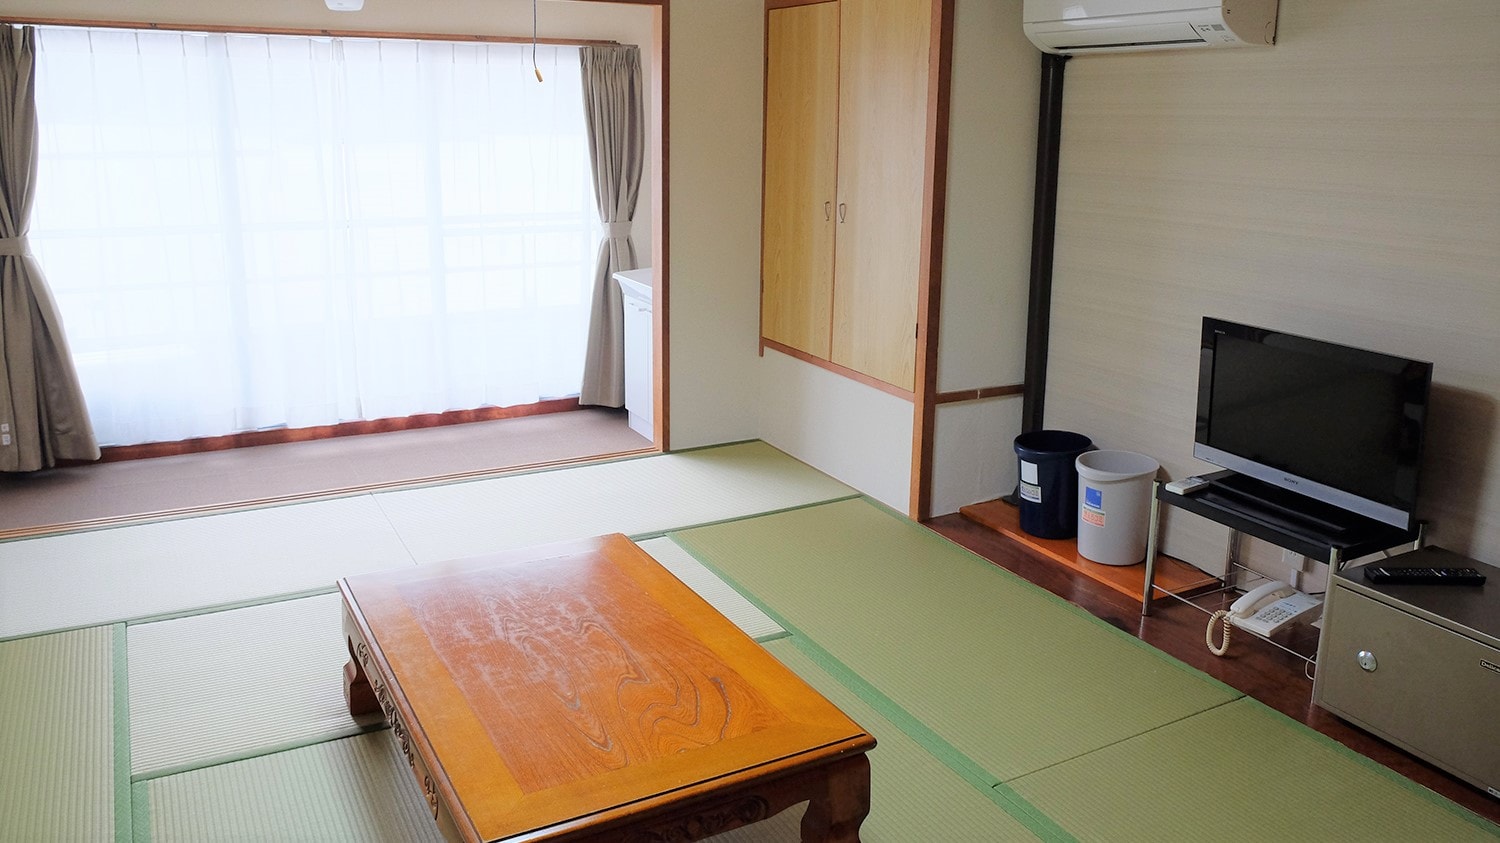 [Guest room] Japanese style room 10 tatami mats: Pacific beach view (example)